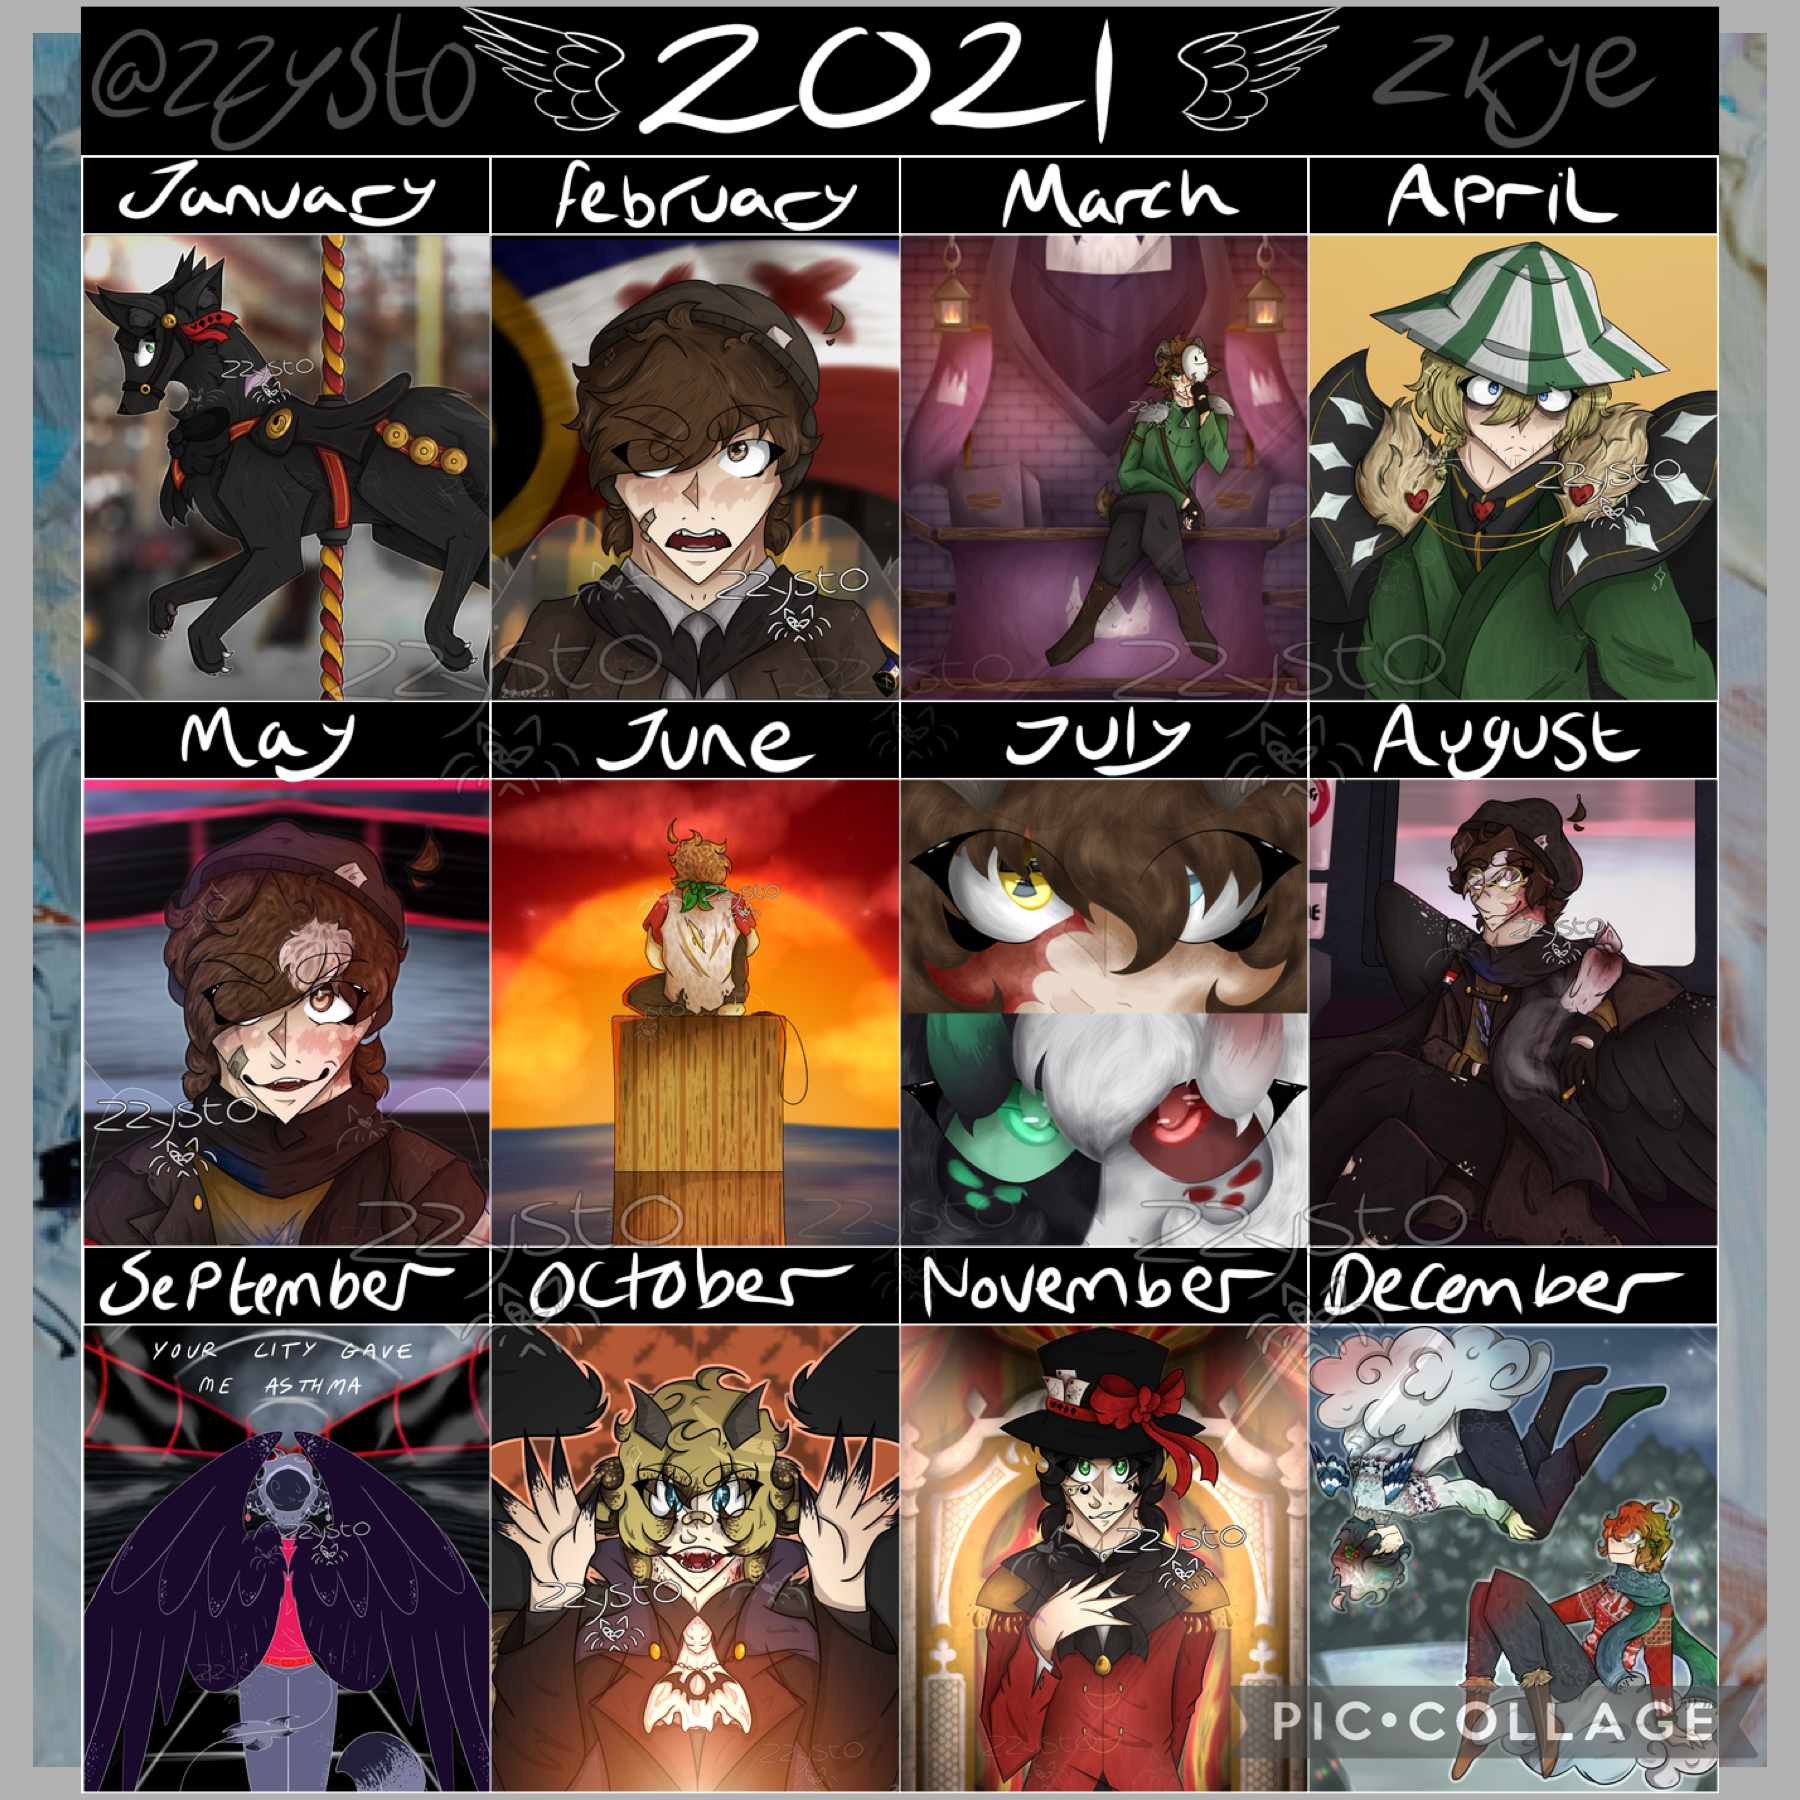 🎆TAP🎆
[OLDER YEARS IN REMIXES]
my 2021 art summary! :D
this year has been weird for my art, I got a new iPad and pencil in April which took some getting used to, but I’m pretty proud of my art improvement this year, I think- :’)